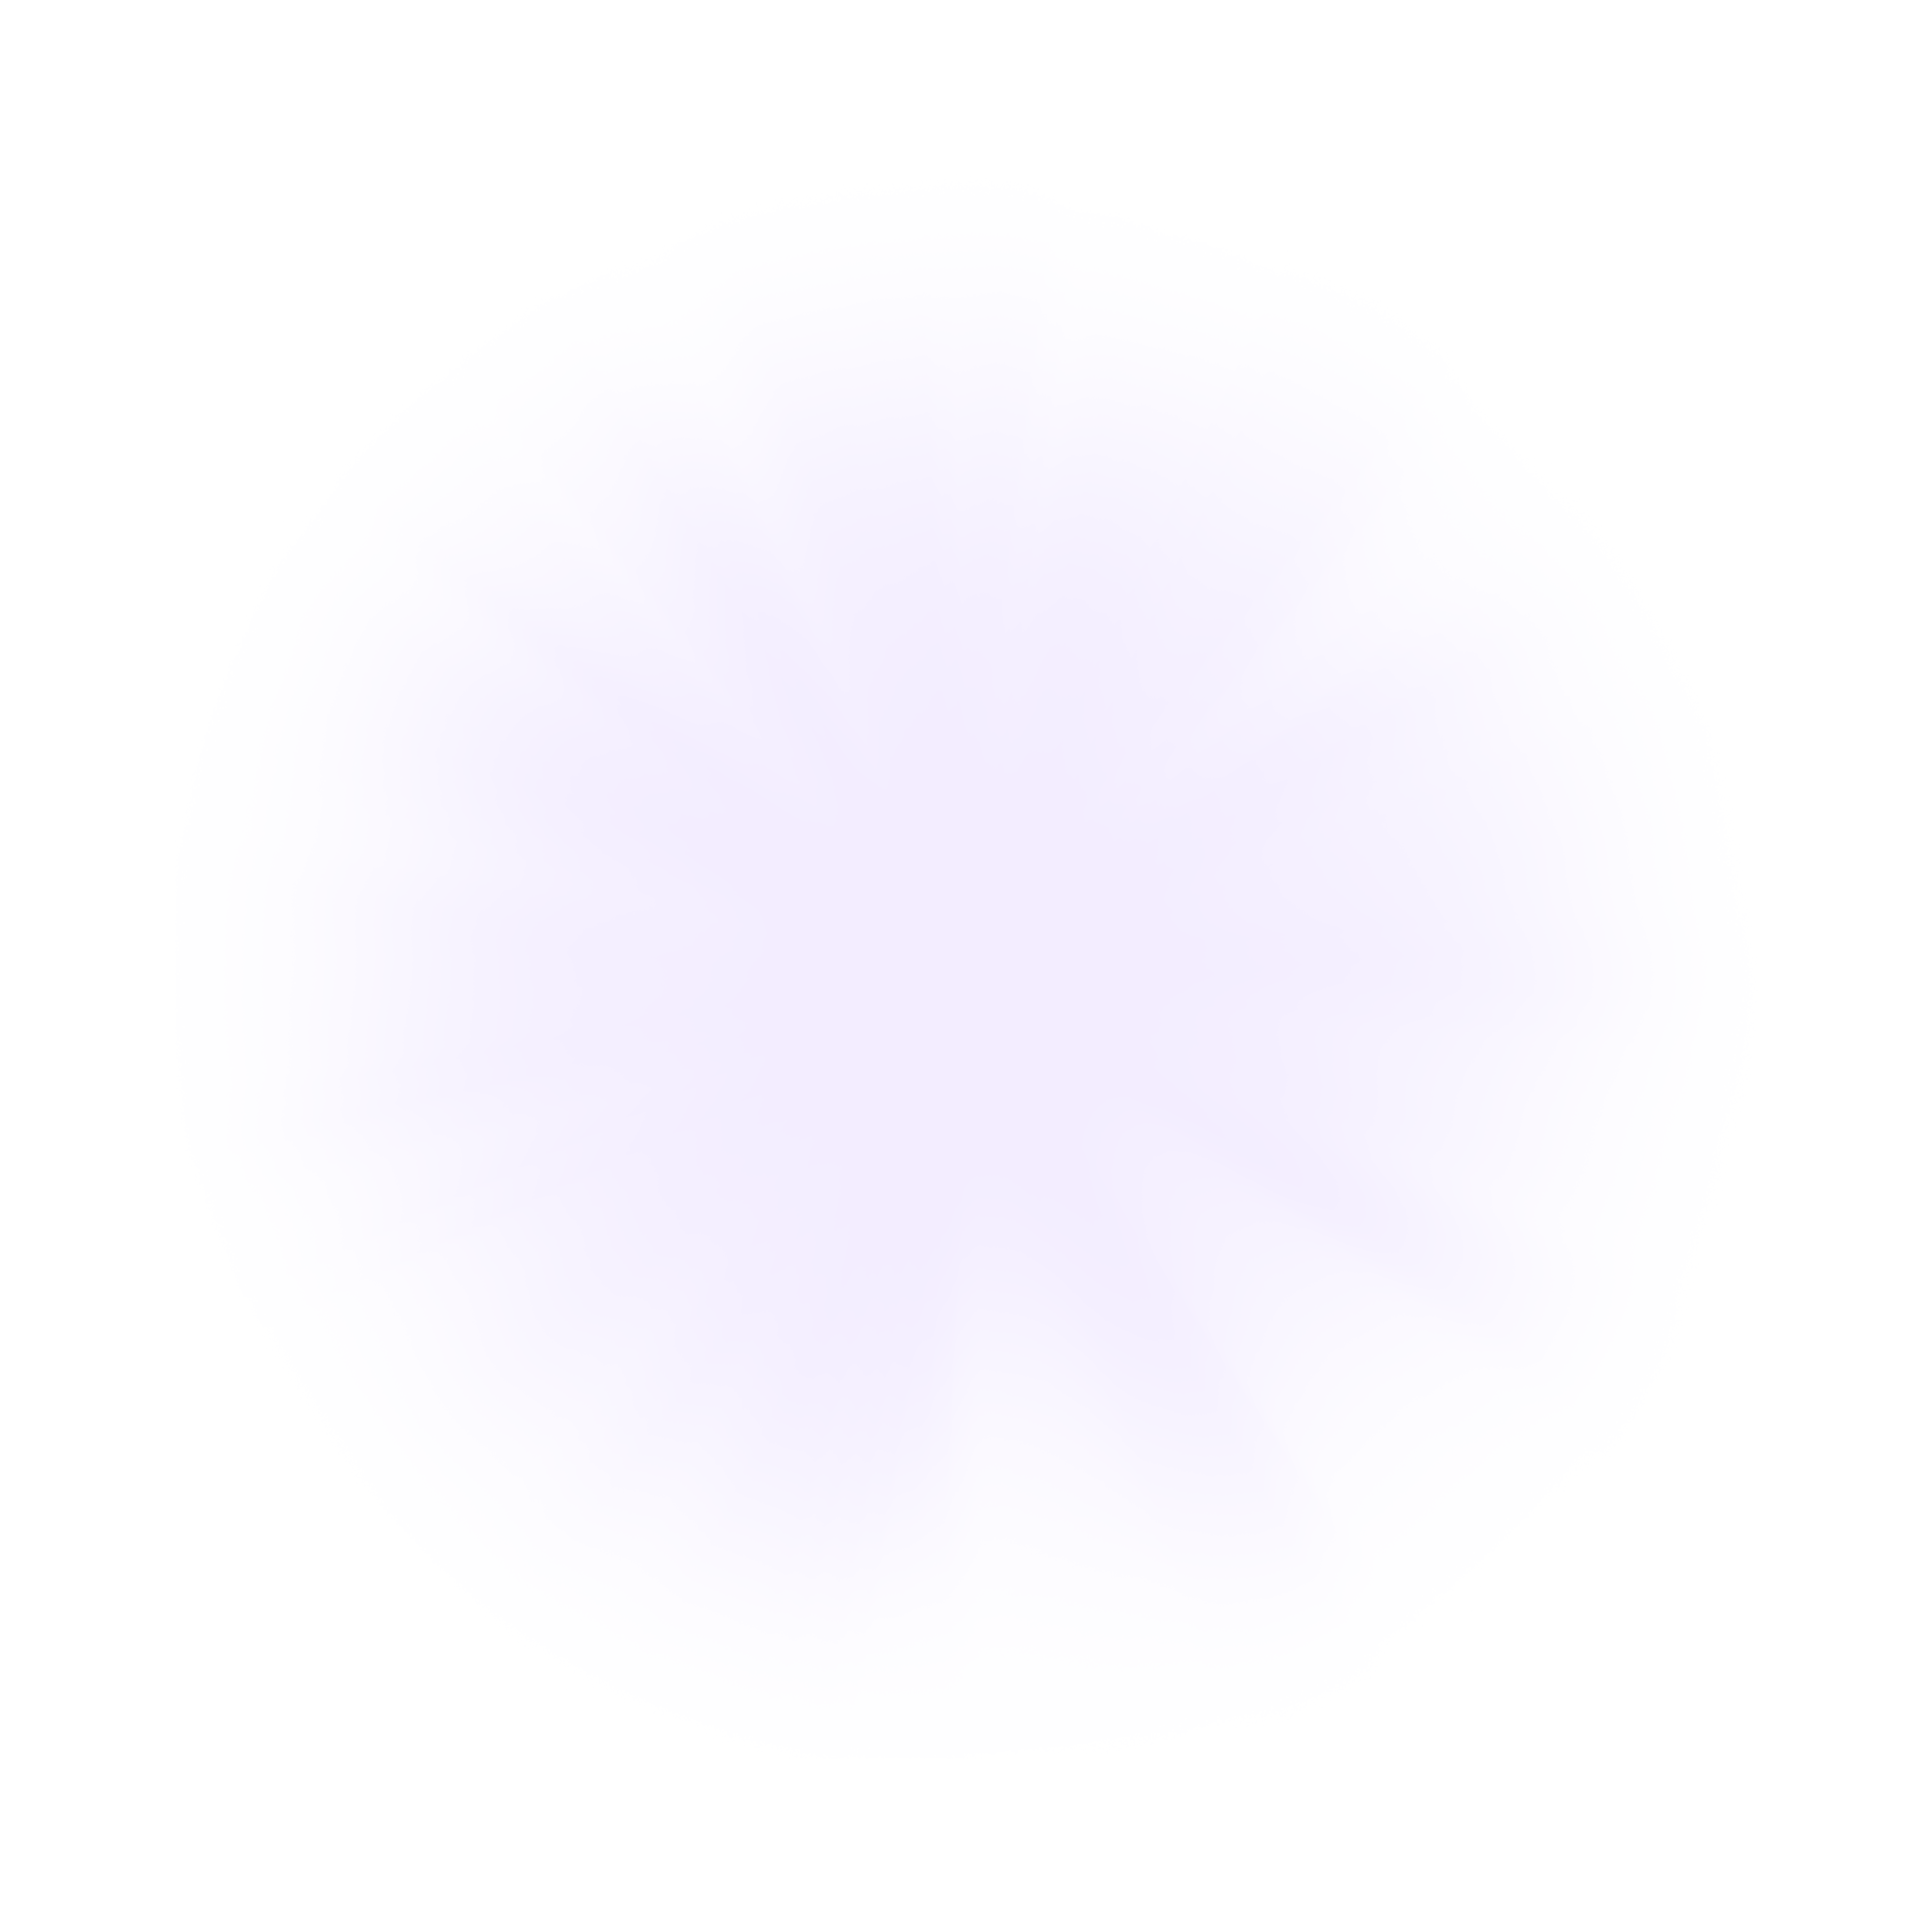 Light Beam PNG Picture